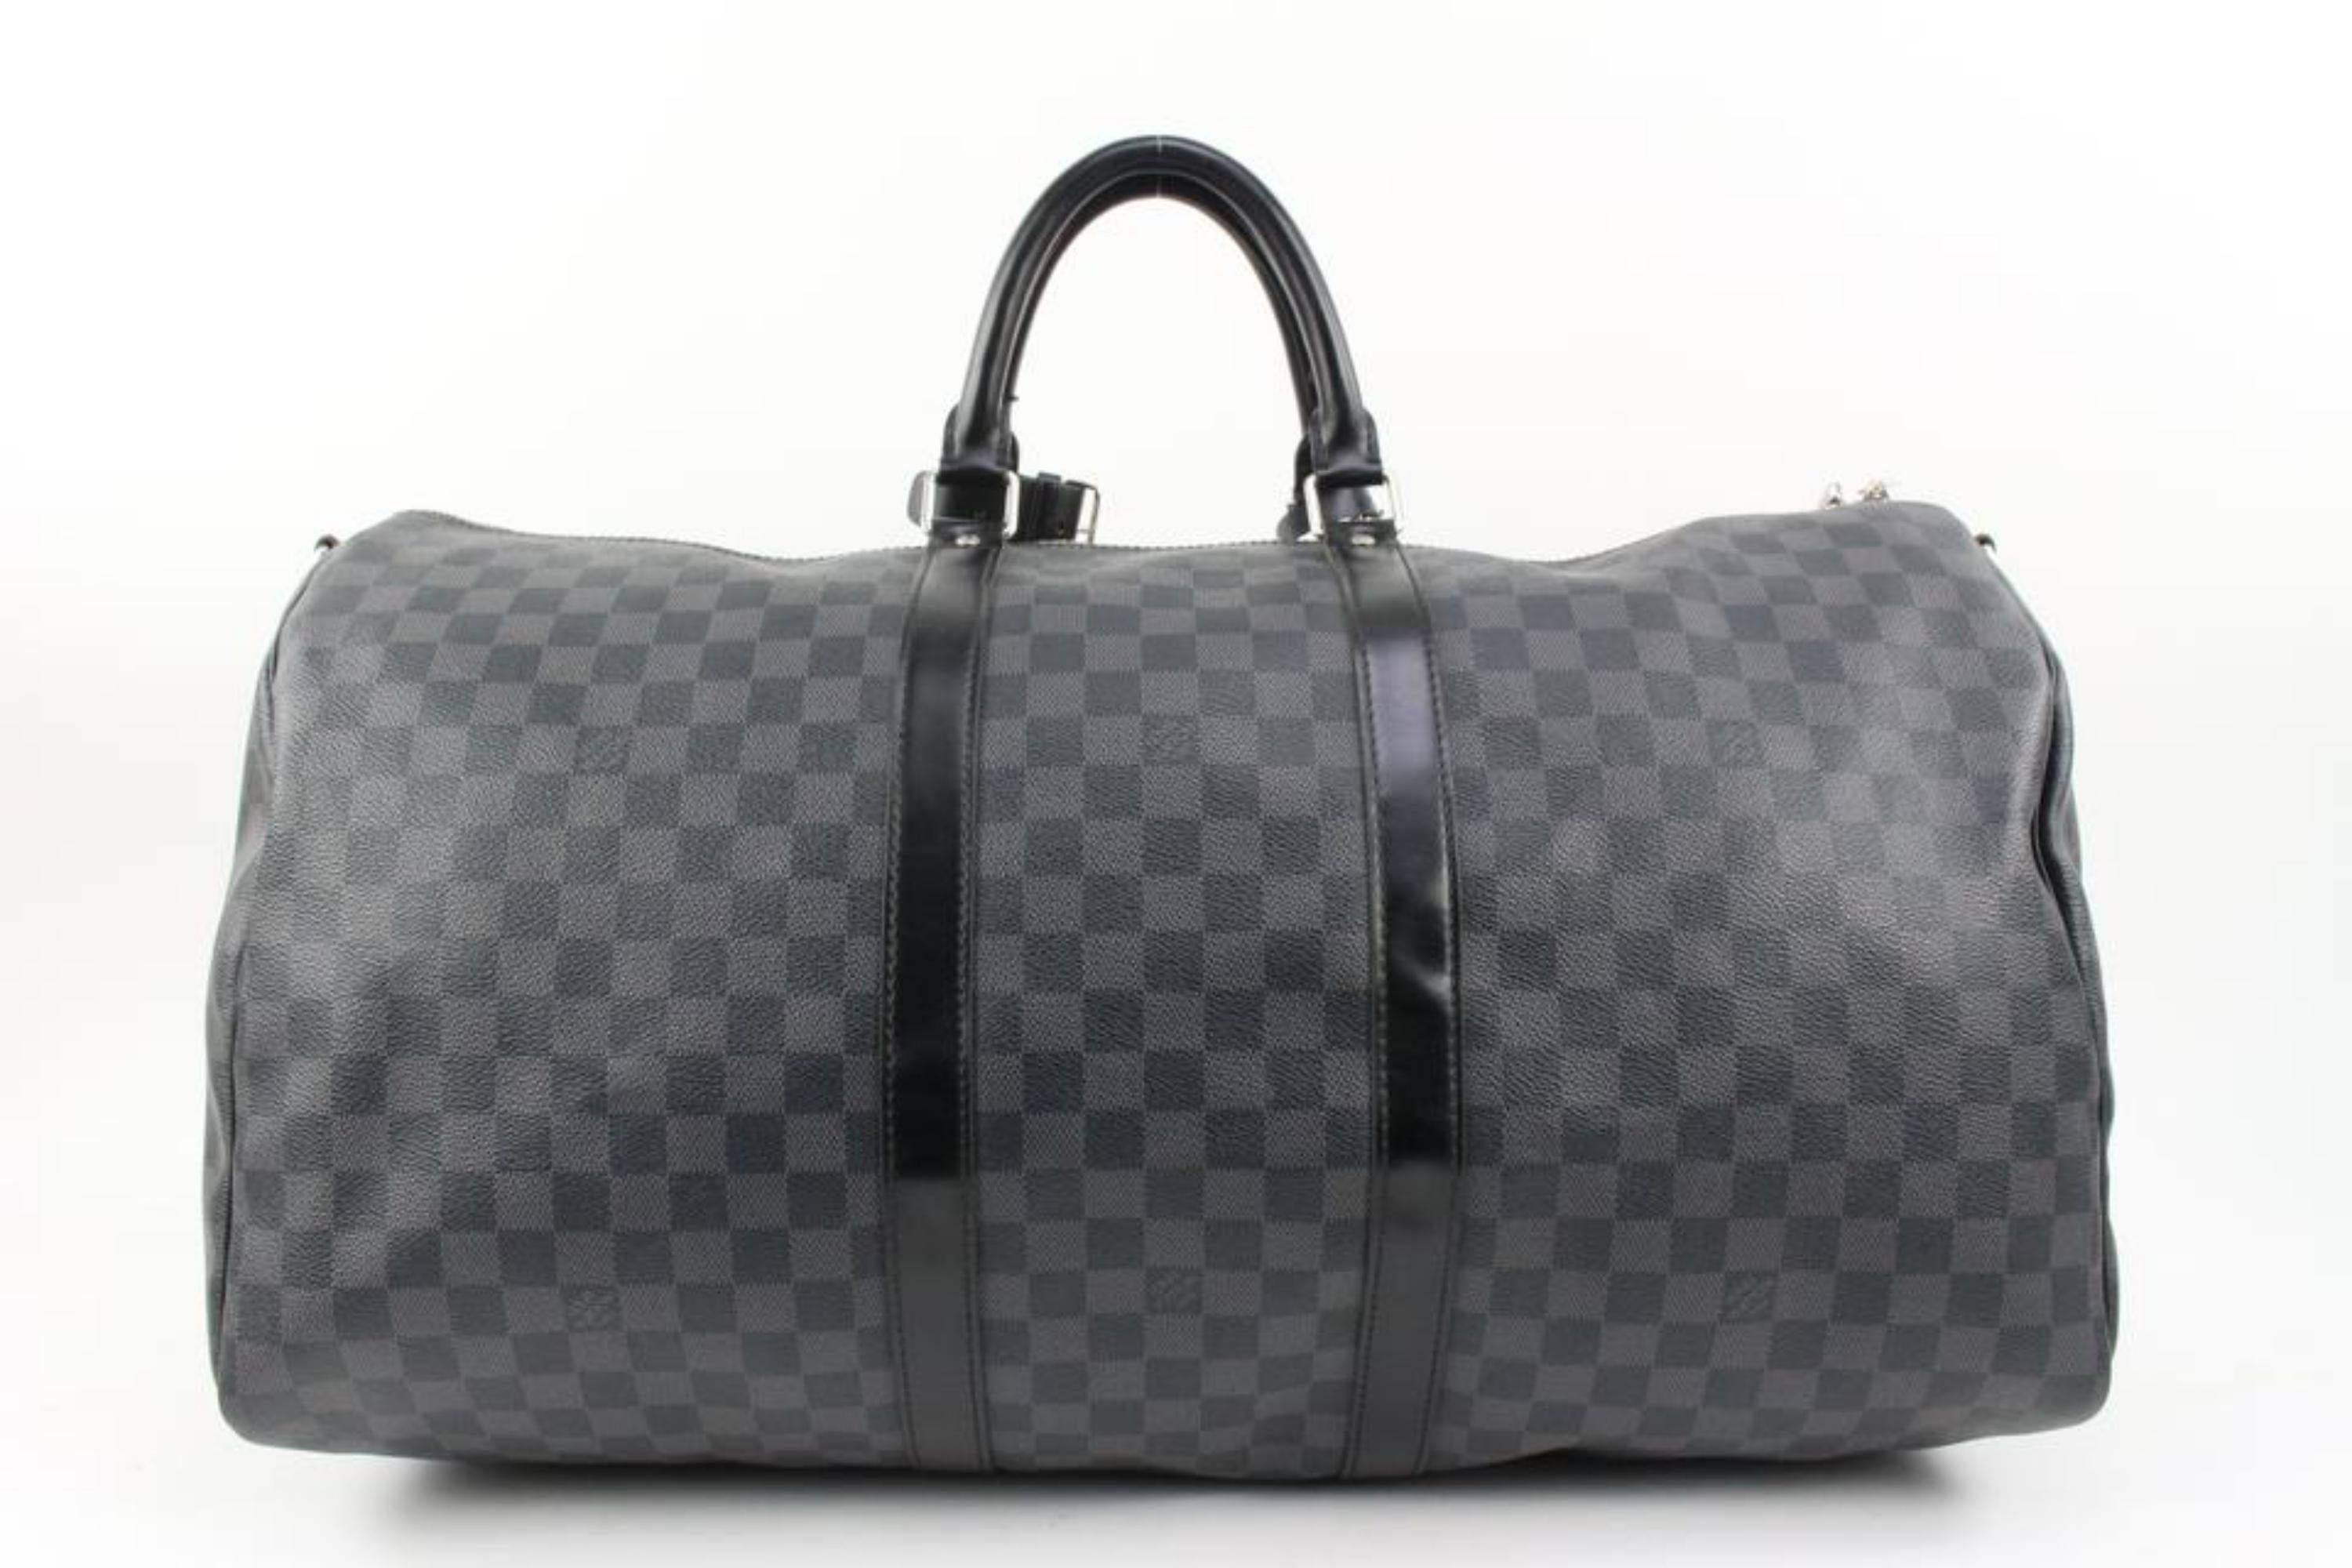 Louis Vuitton Damier Graphite Keepall Bandouliere 55 Duffle with Strap 97lv221s 1